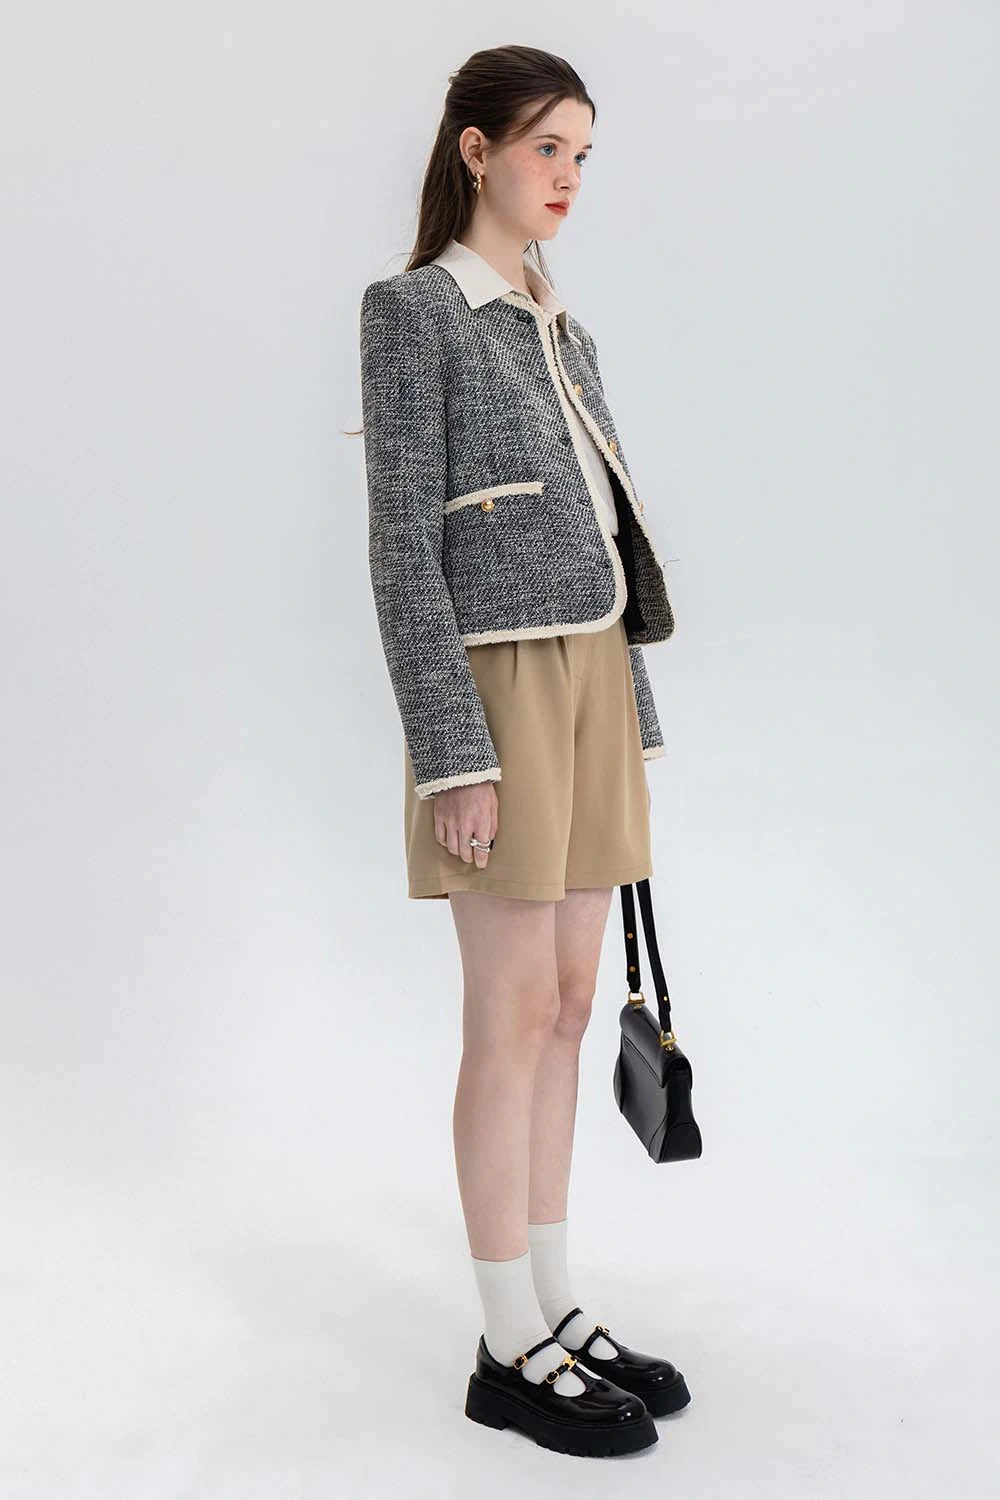 Women's Classic Black and White Tweed Chanel-Style Jacket